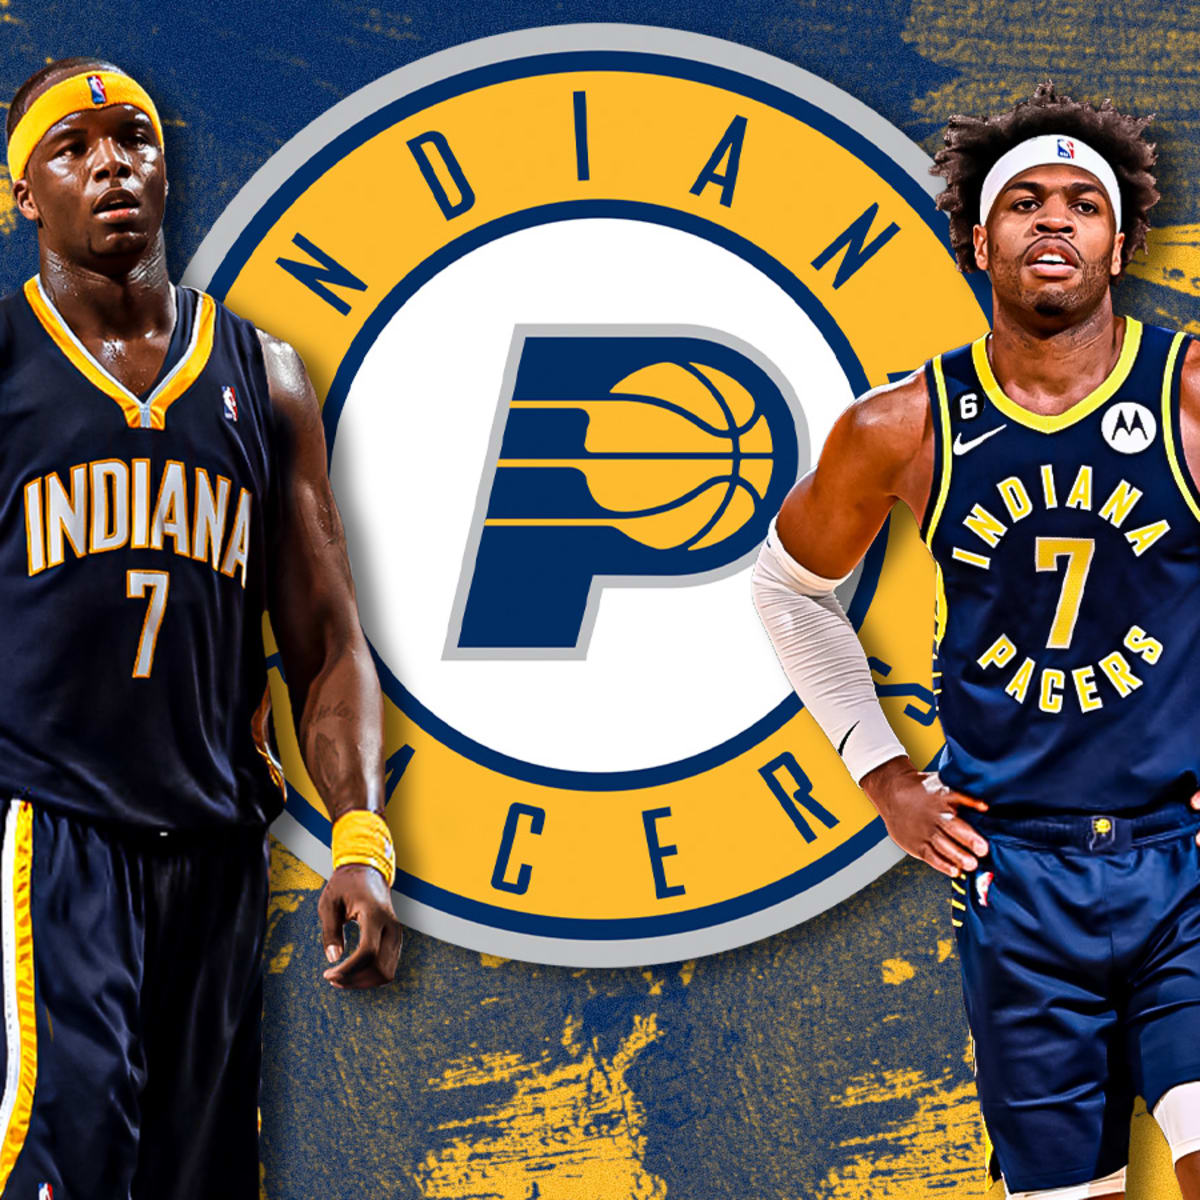 Indiana Pacers guard Buddy Hield changing jersey number from 24 to 7 -  Sports Illustrated Indiana Pacers news, analysis and more